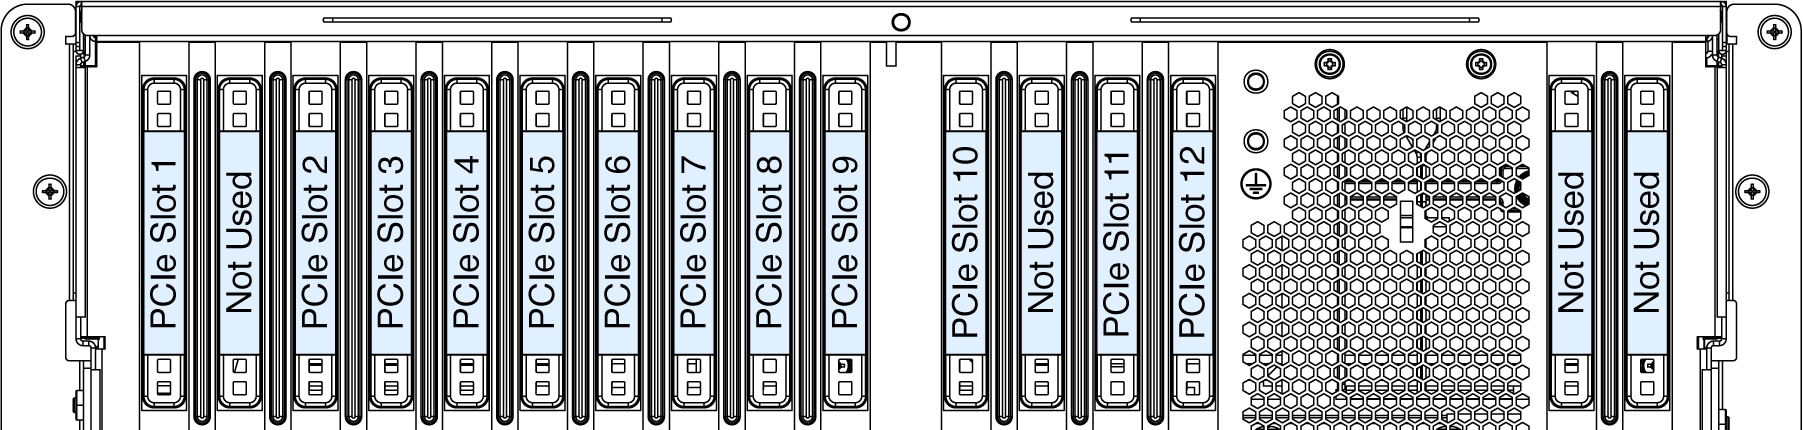 Rear panel slots of the 112-core appliance